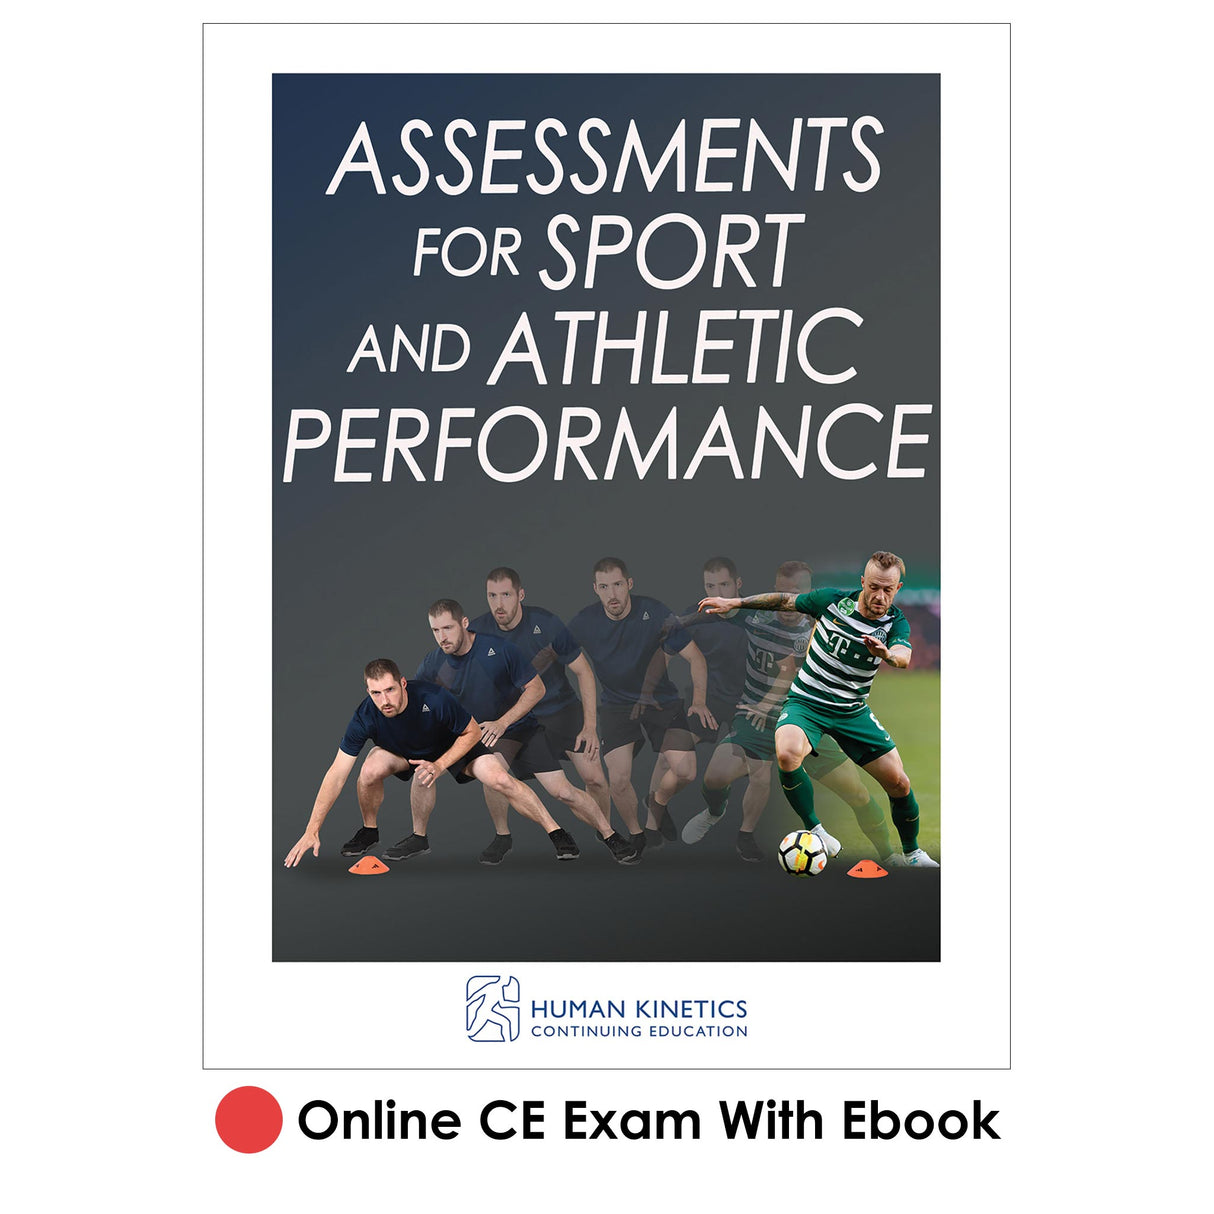 Assessments for Sport and Athletic Performance Online CE Exam With Ebook